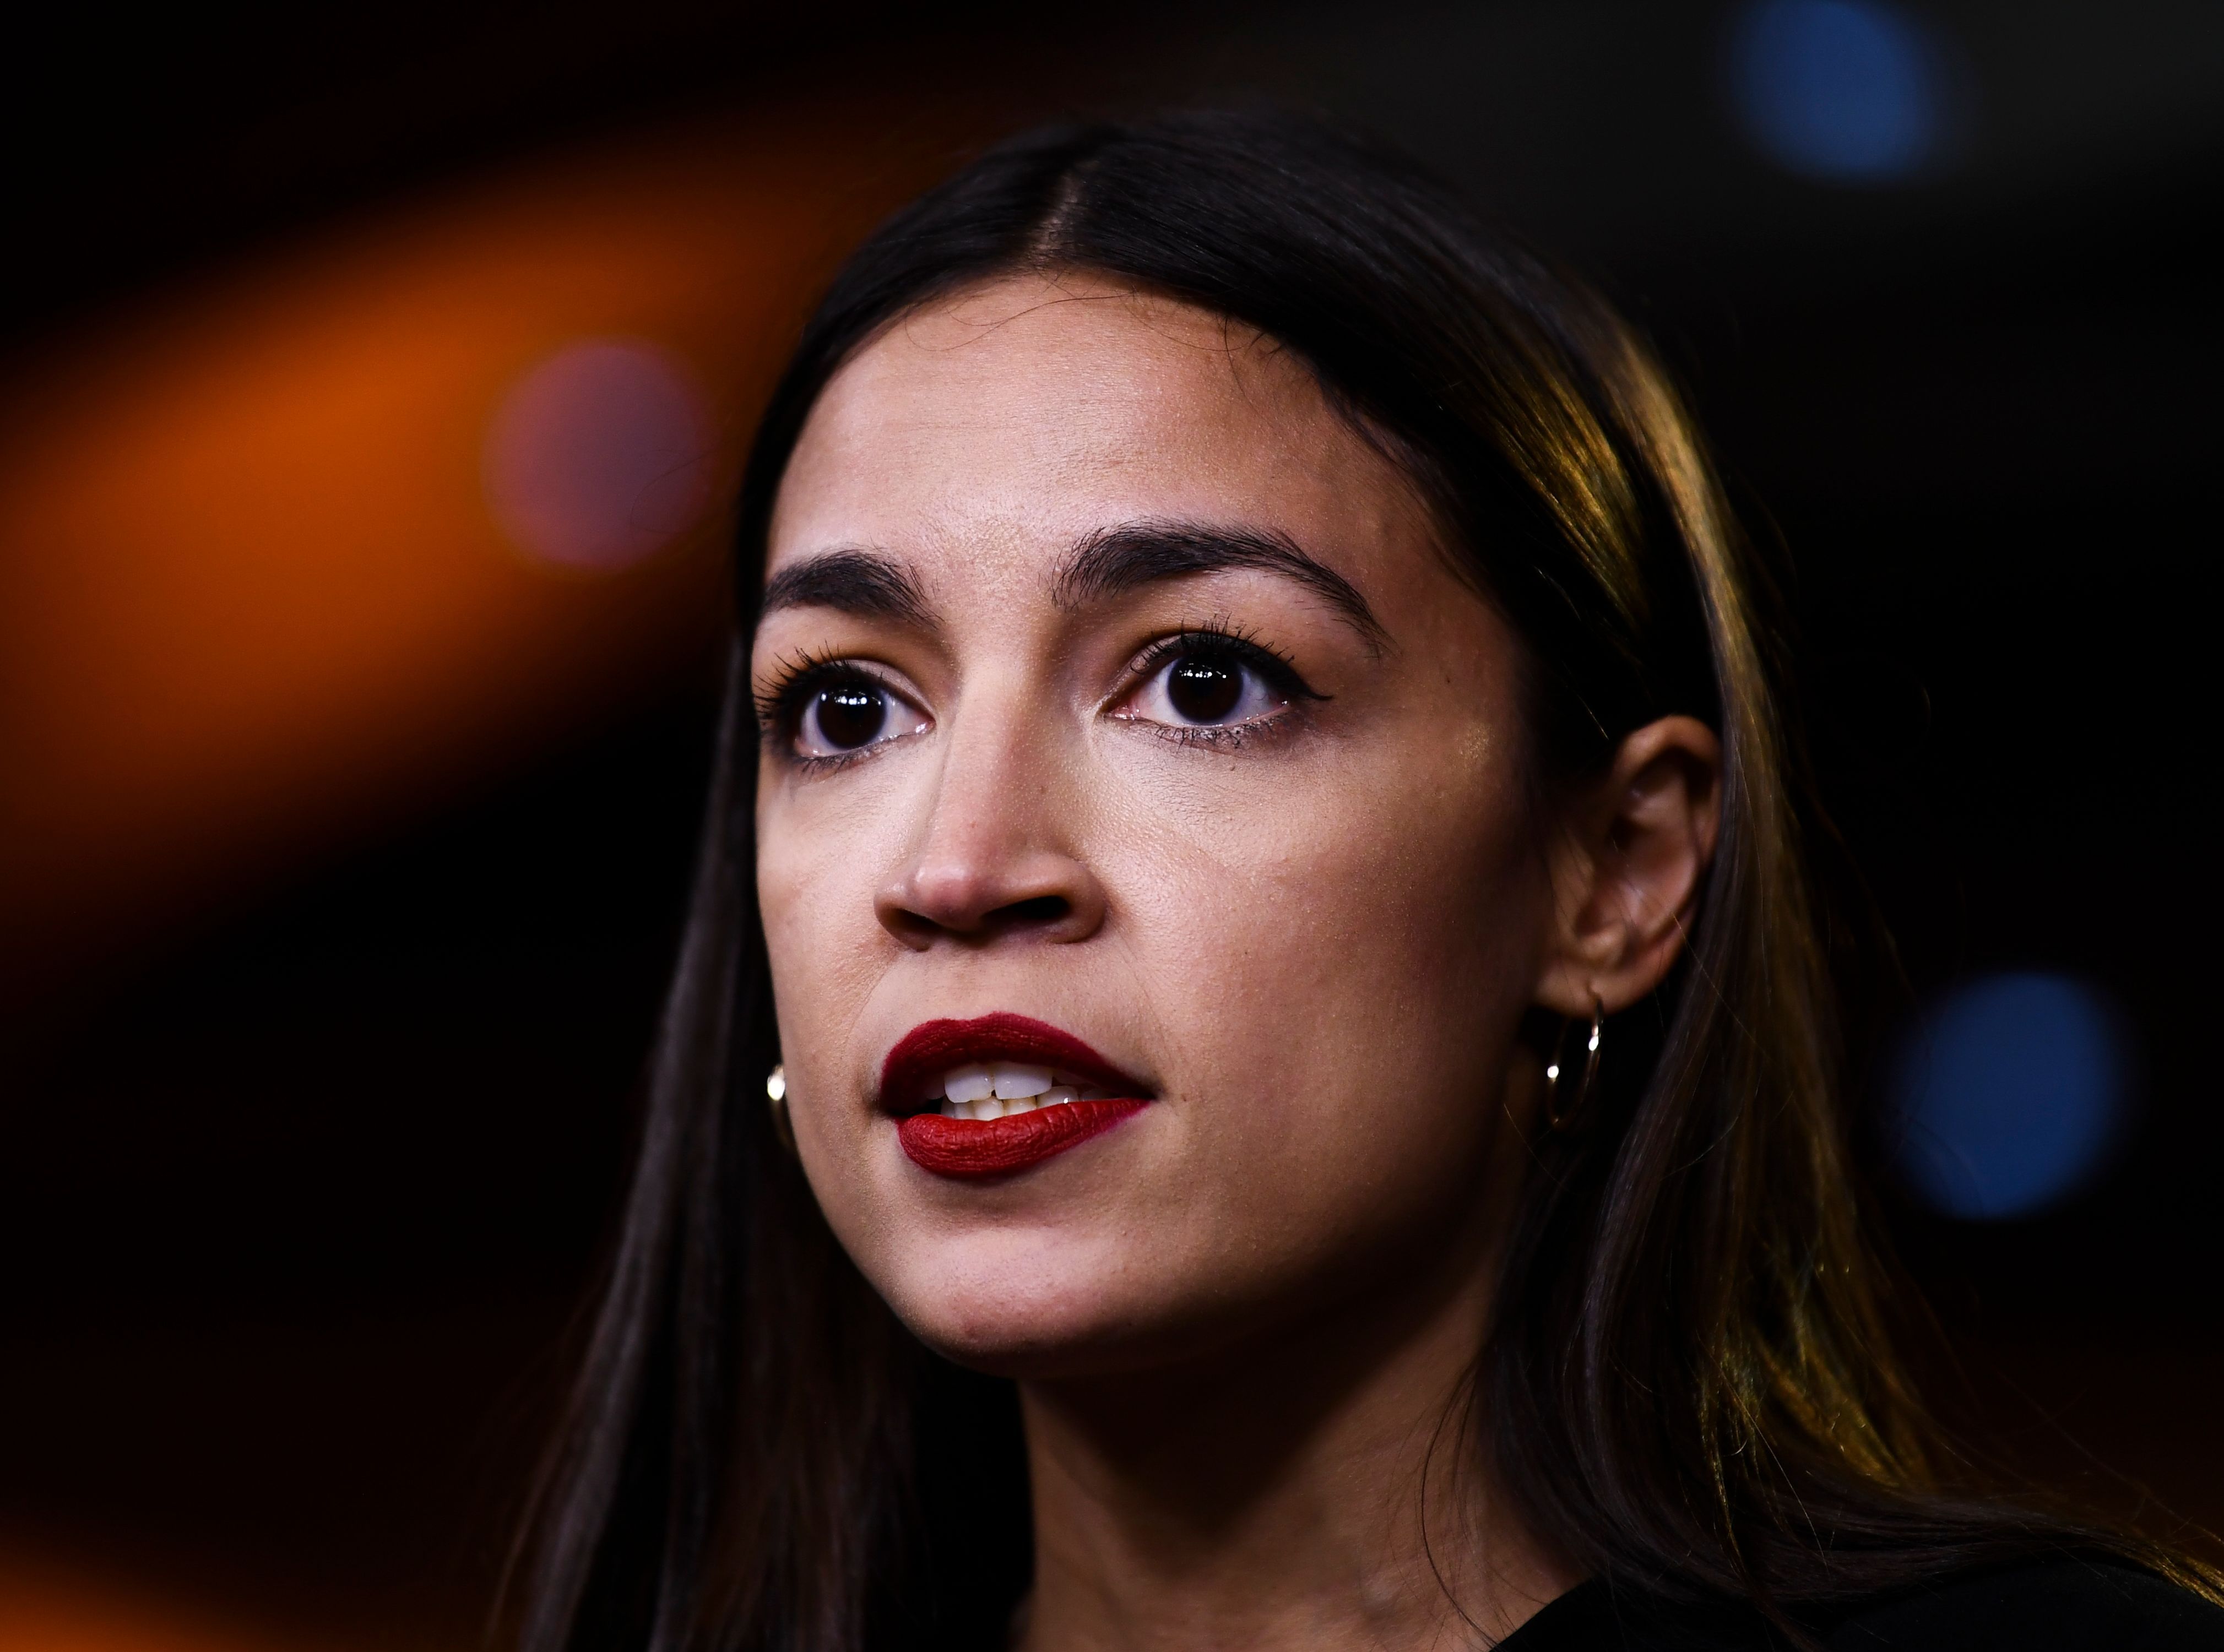 AOC Reveals She Is a Sexual Assault Survivor as She Recounts the Capitol Insurrection